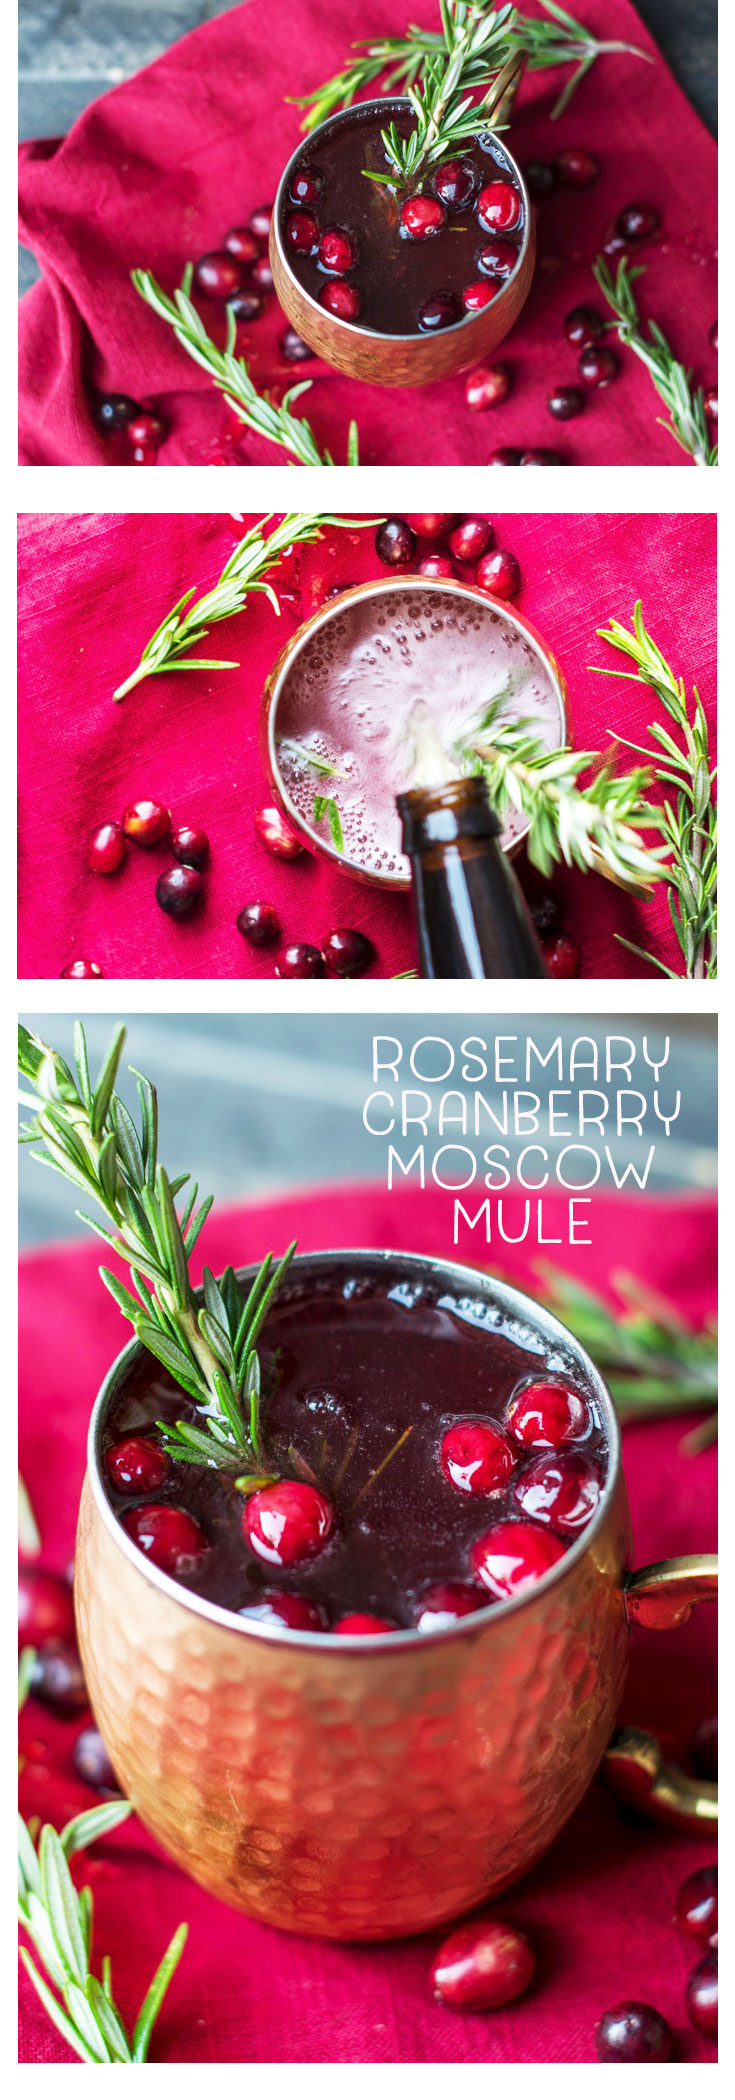 Looking for a holiday drink recipe? Try this refreshing, unique, and festive Rosemary and Cranberry Moscow Mule that features tastes of the holiday season! #cranberry #moscowmule #holidaydrink #drinkrecipe #Christmascocktail #cocktailrecipe #rosemary via @mrsmajorhoff